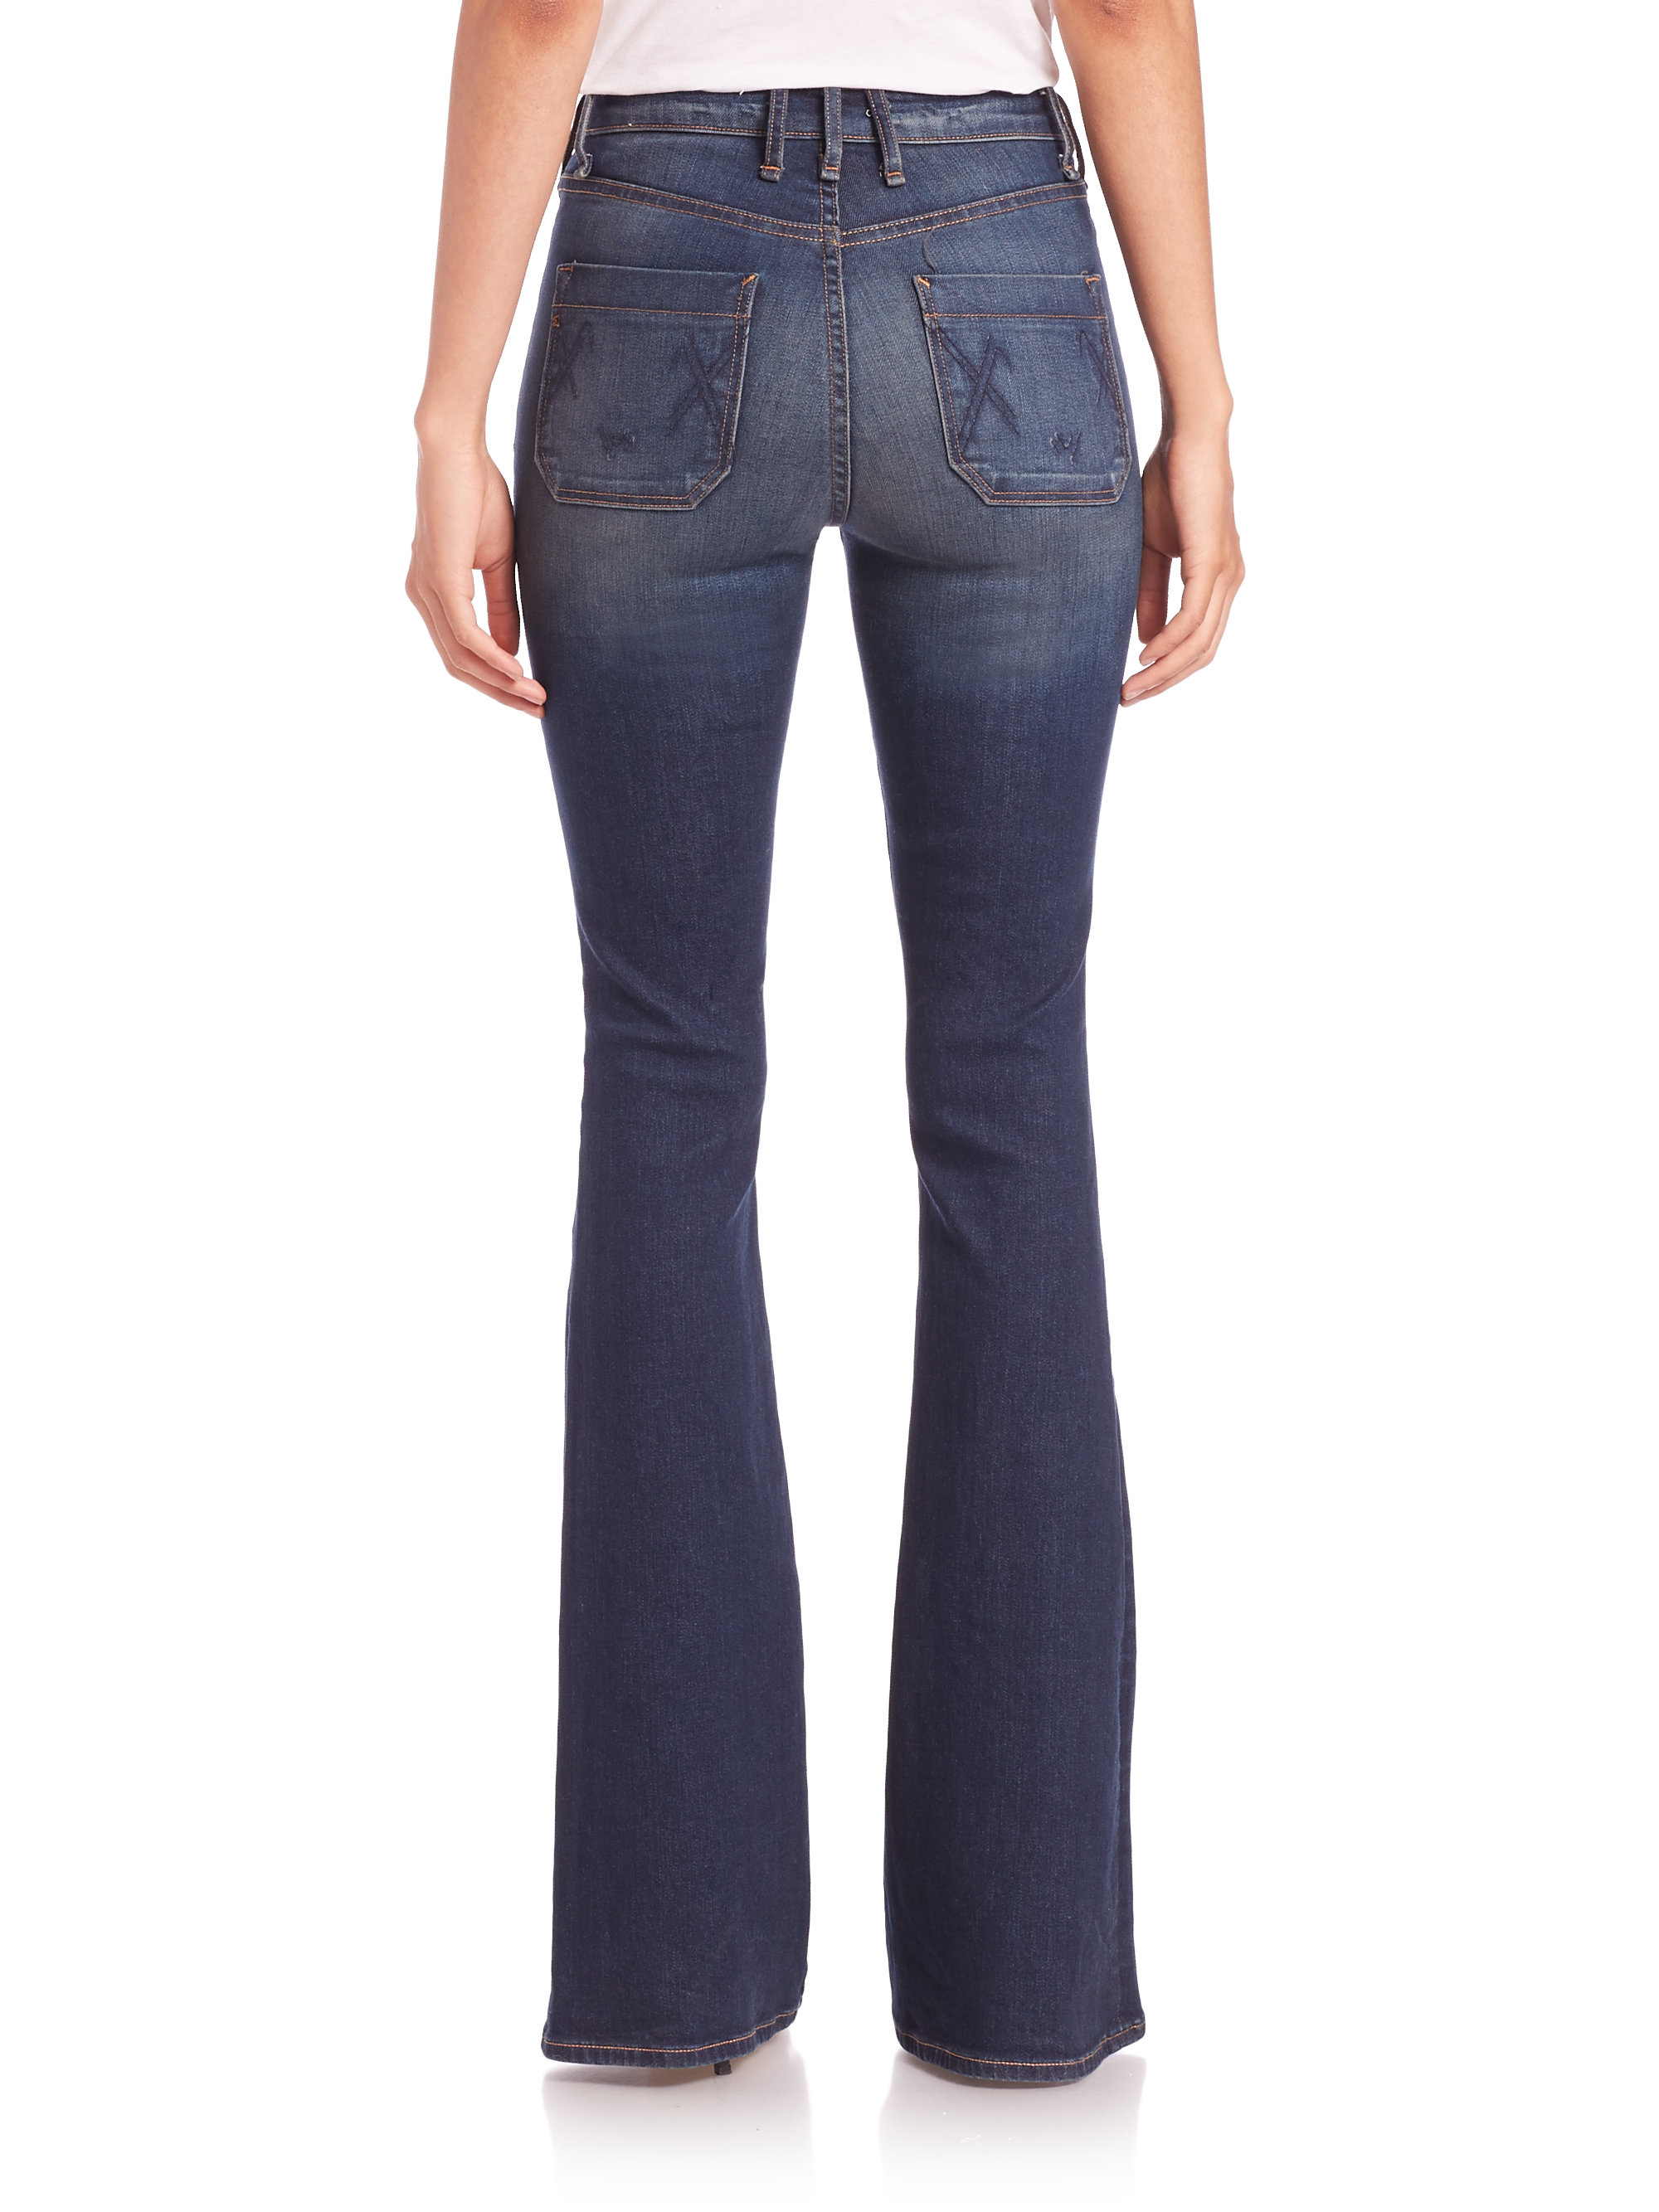 Lyst - Mcguire Yachtie Button-front Flared Jeans in Blue